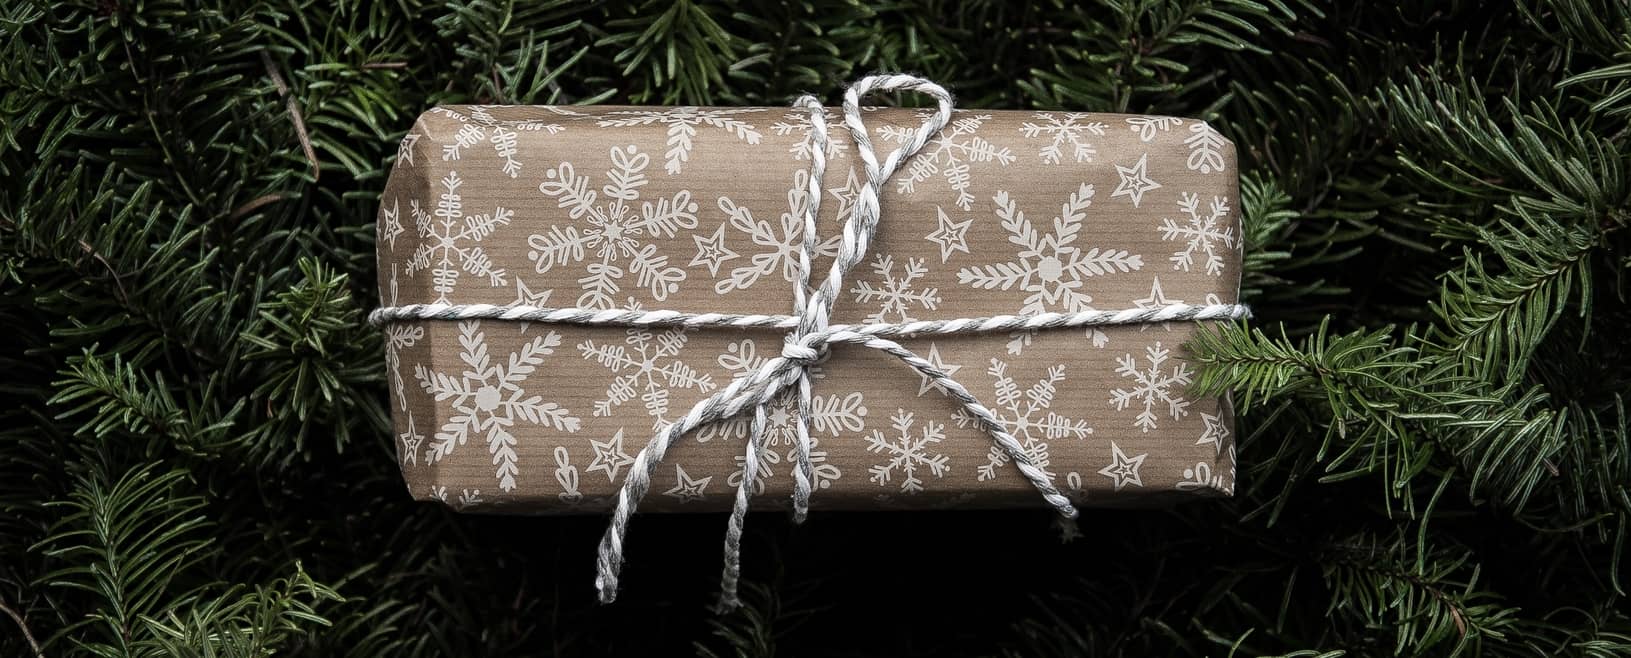 How to Have a Green Eco-friendly Christmas